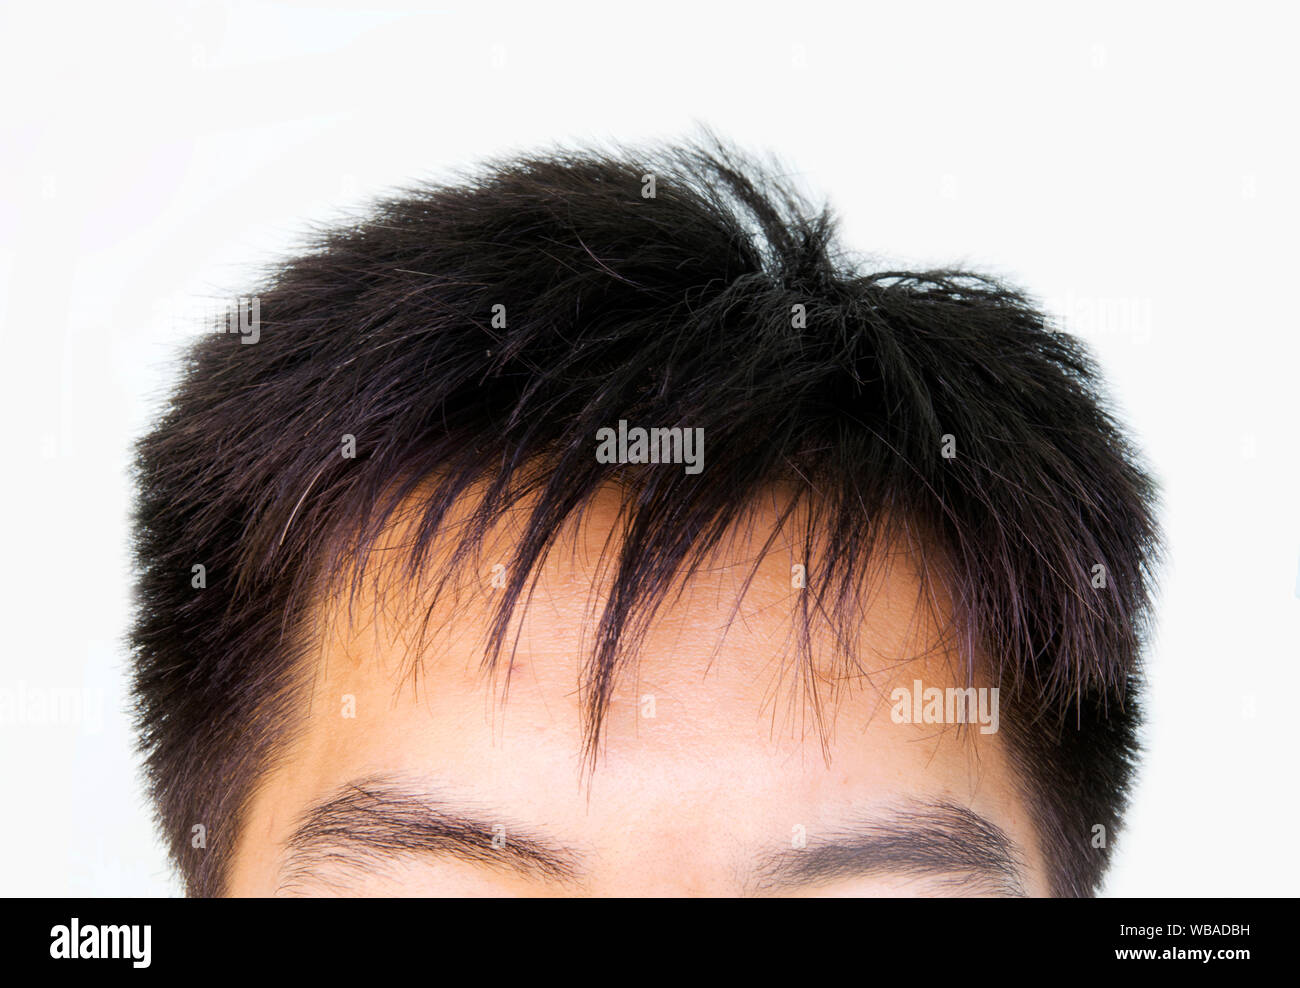 hair loss, Male head with hair loss symptoms front side Stock Photo - Alamy